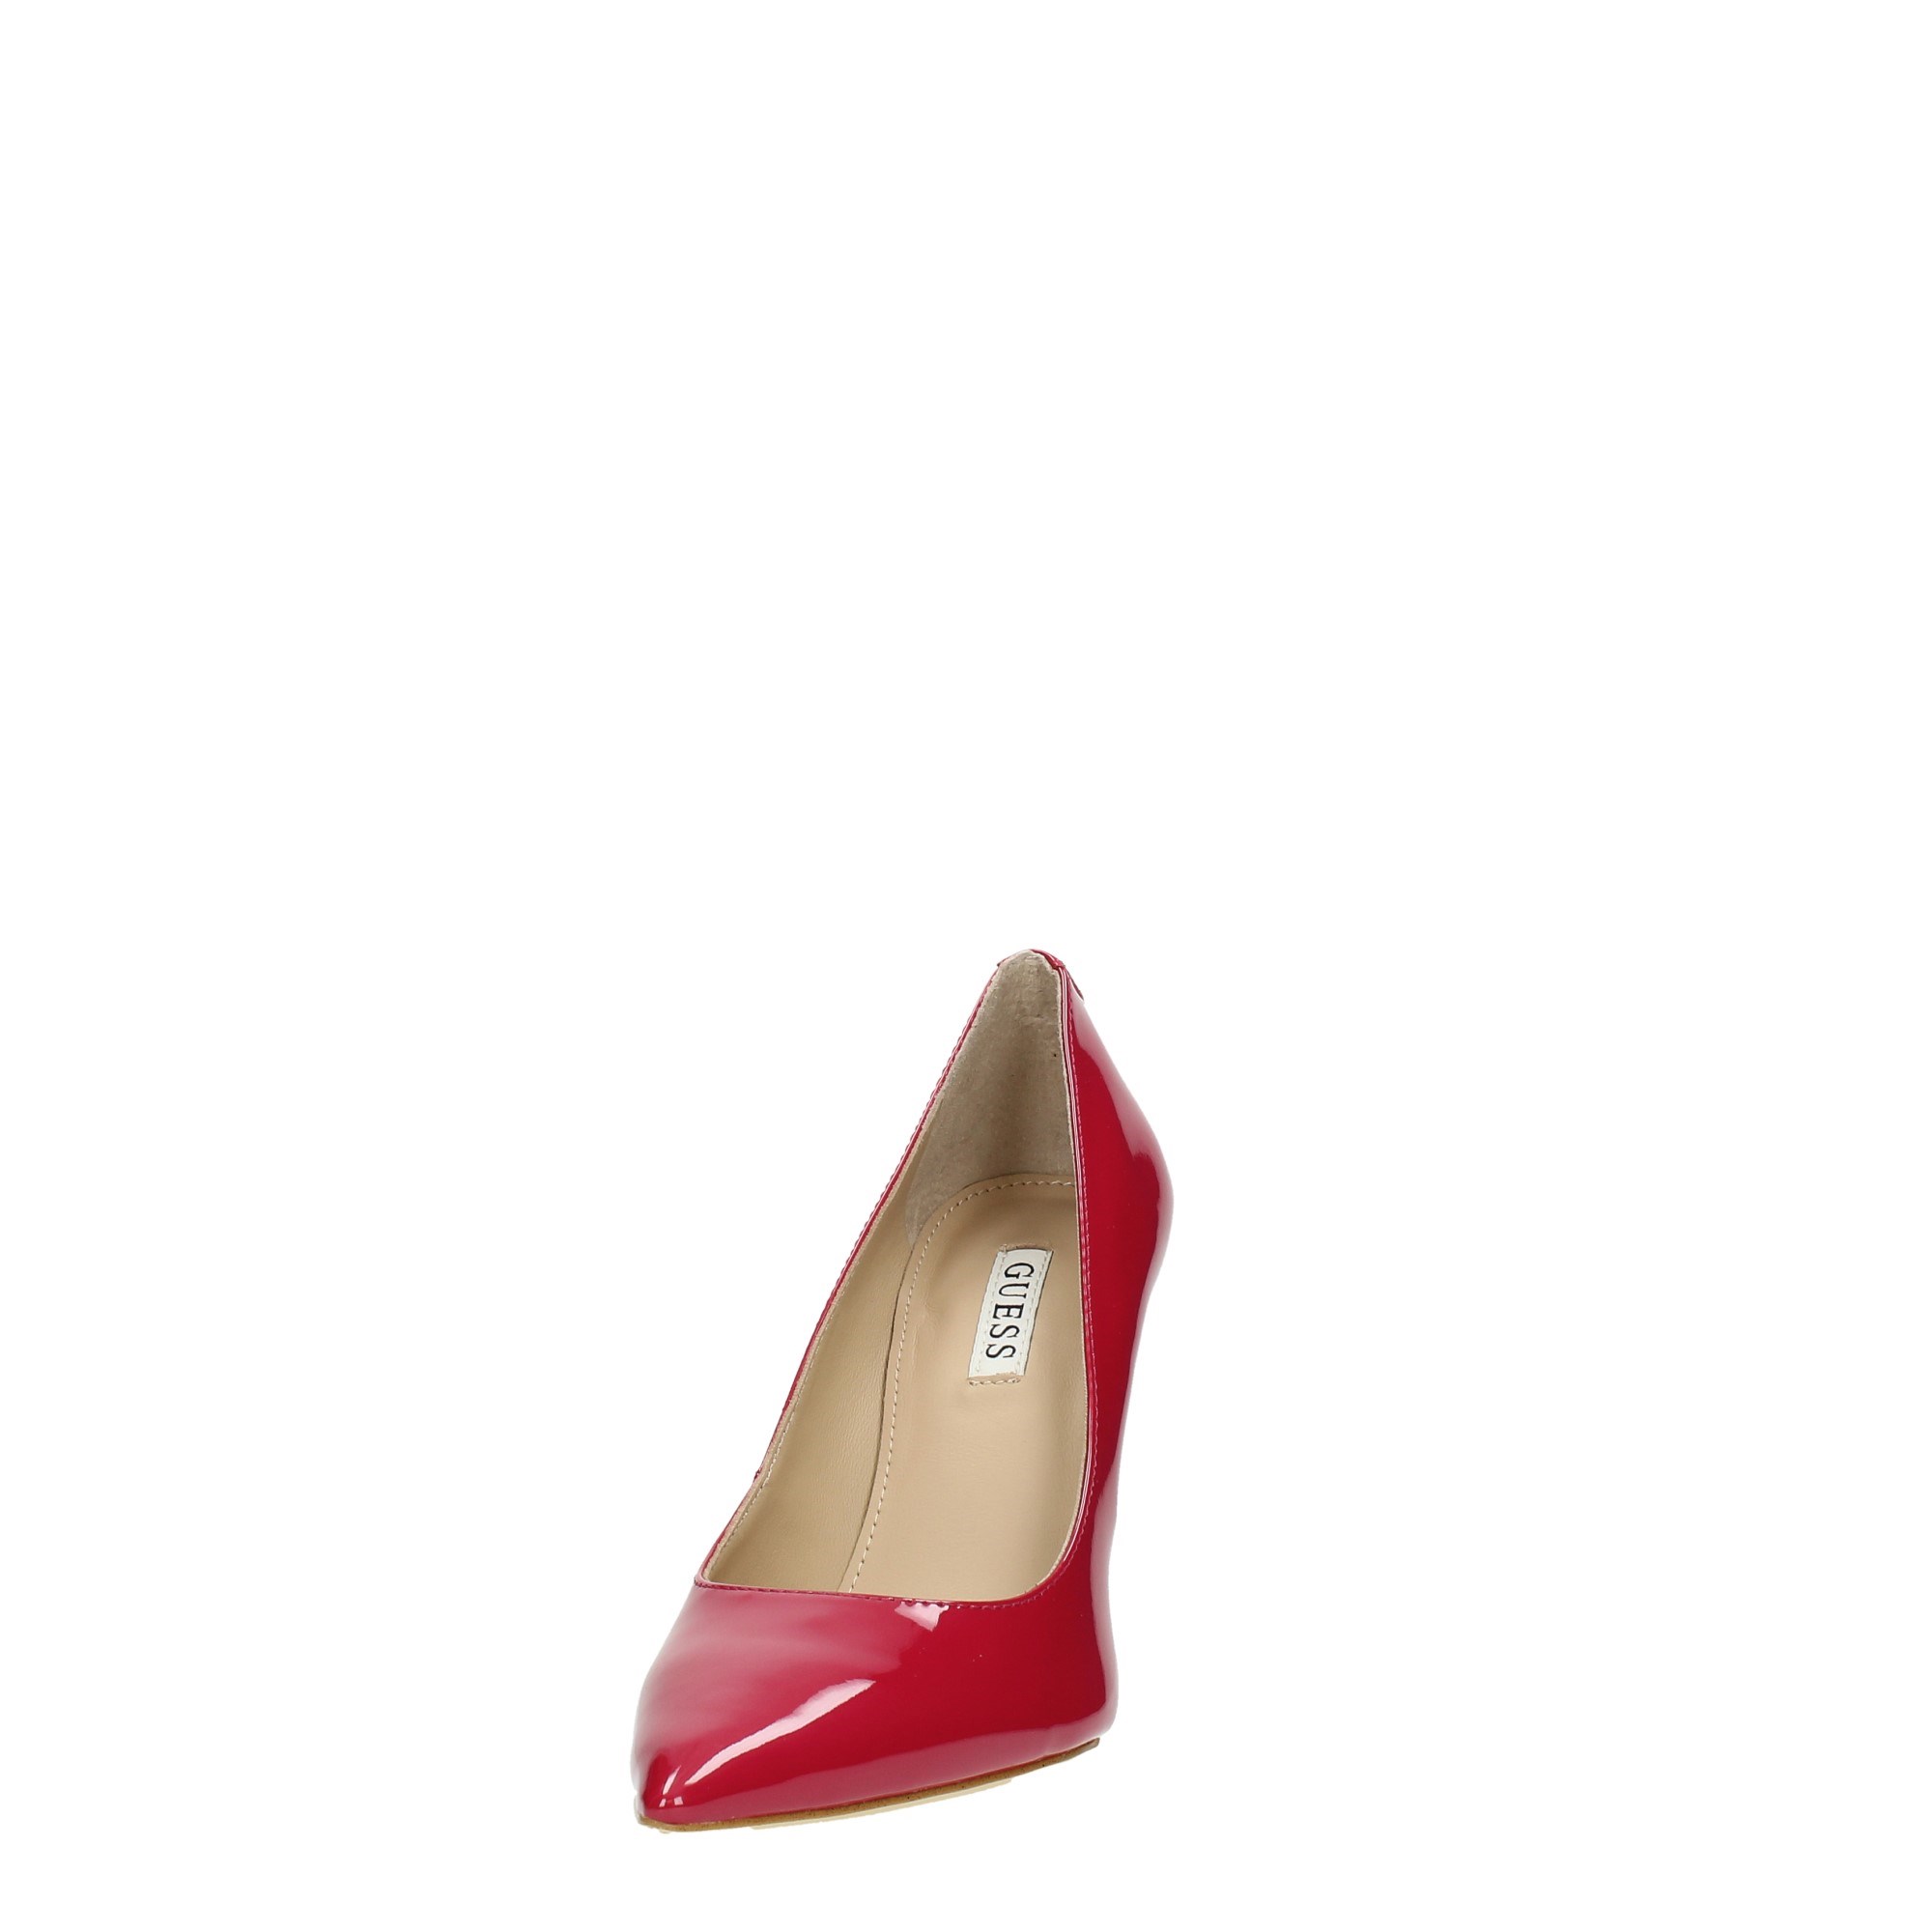 Guess Shoes Women Cleavage And Heeled Shoes Red FL7G10